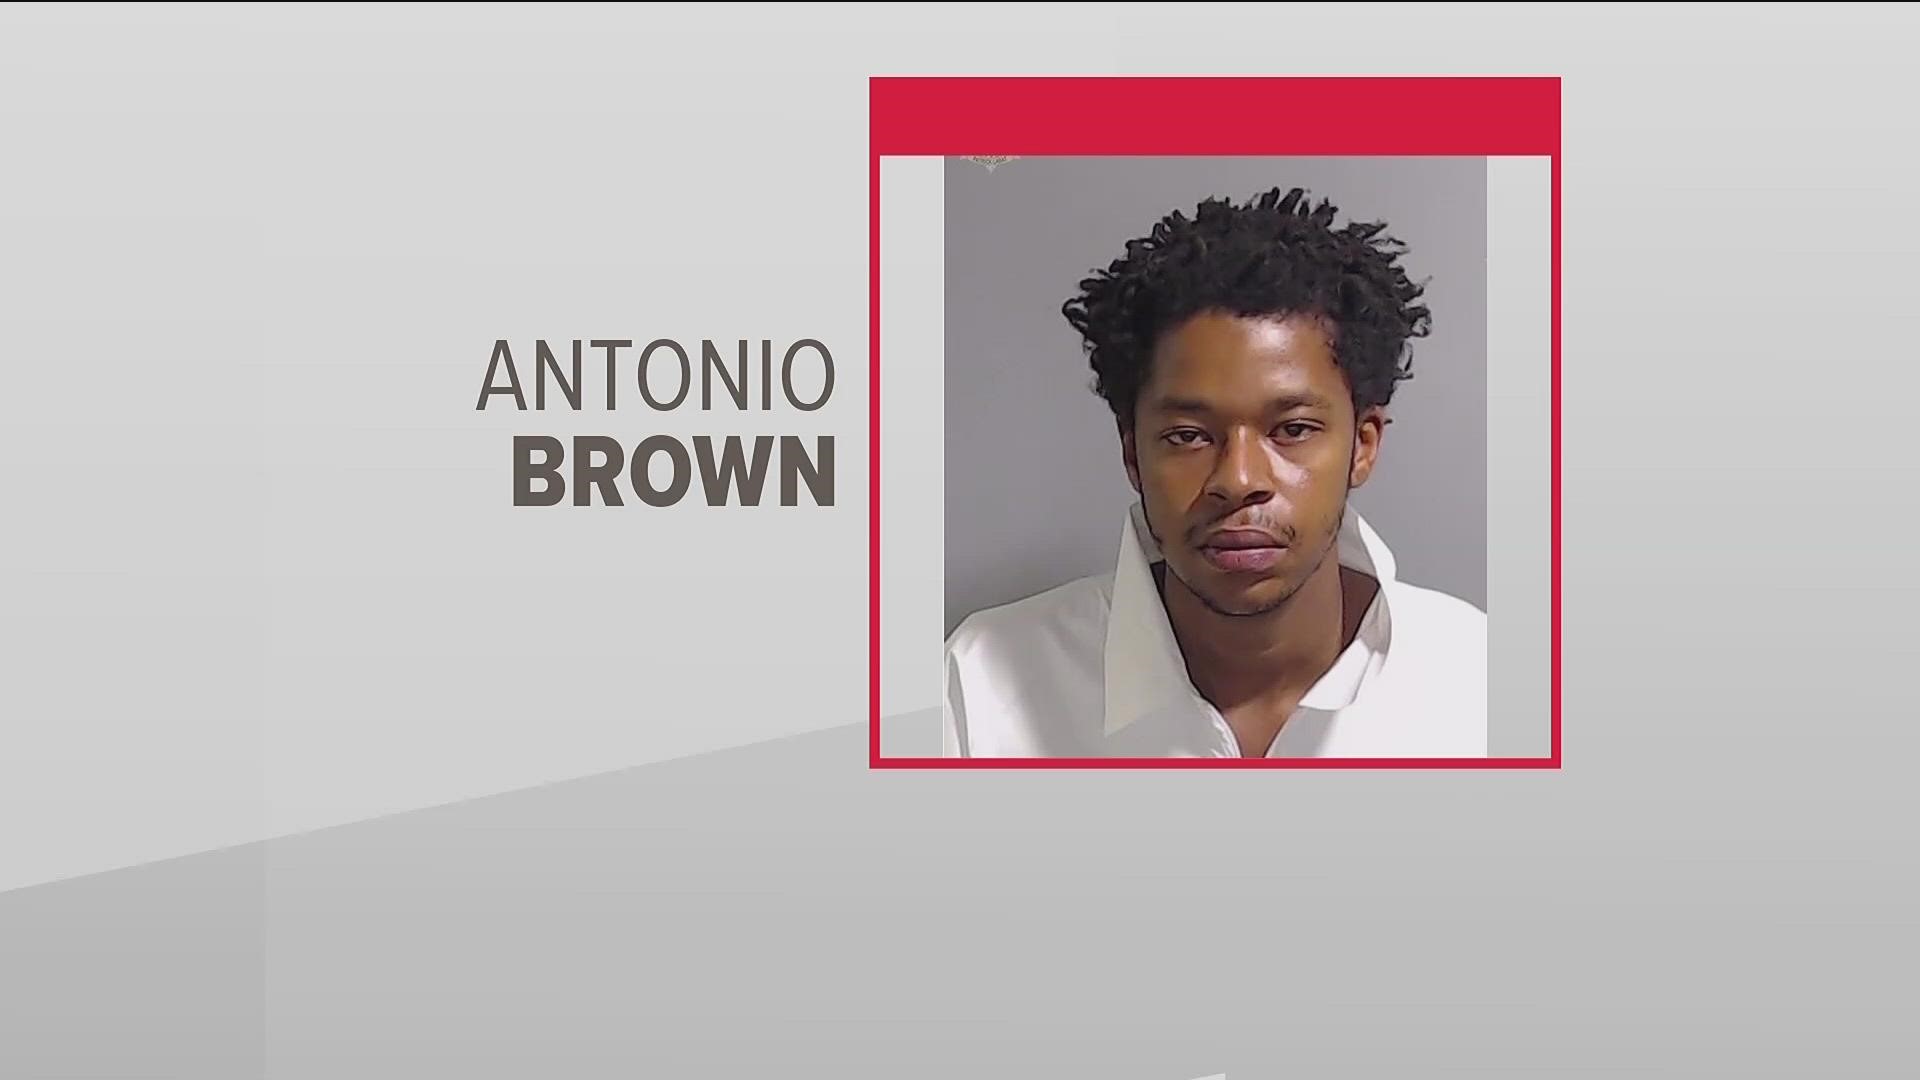 23-year-old Antonio Brown was arrested in December.